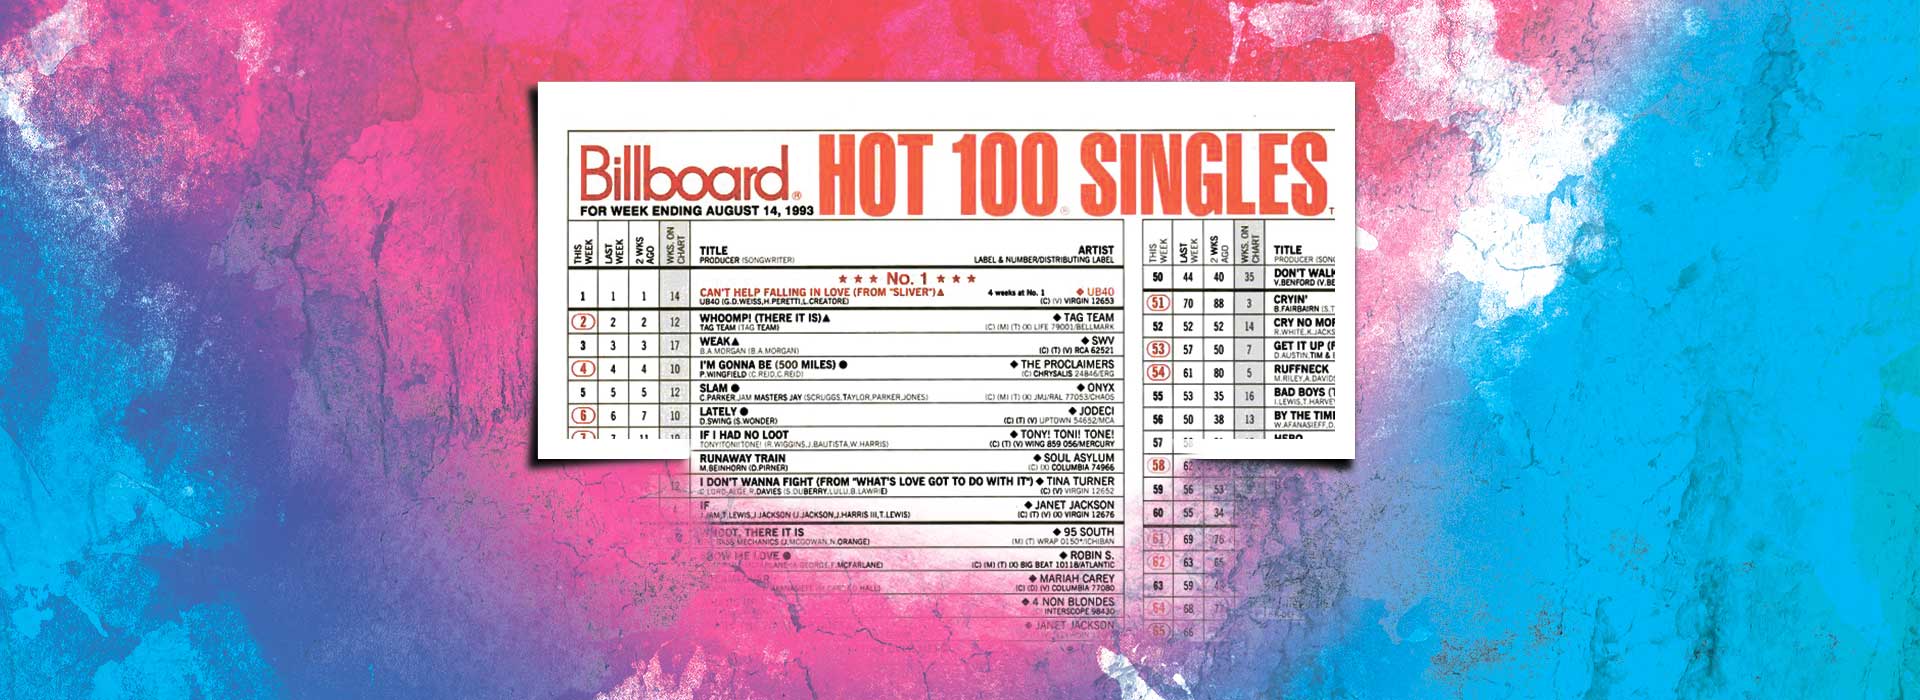 Tag Team Chart position in 1993 from Billboard Magazine Hot 100